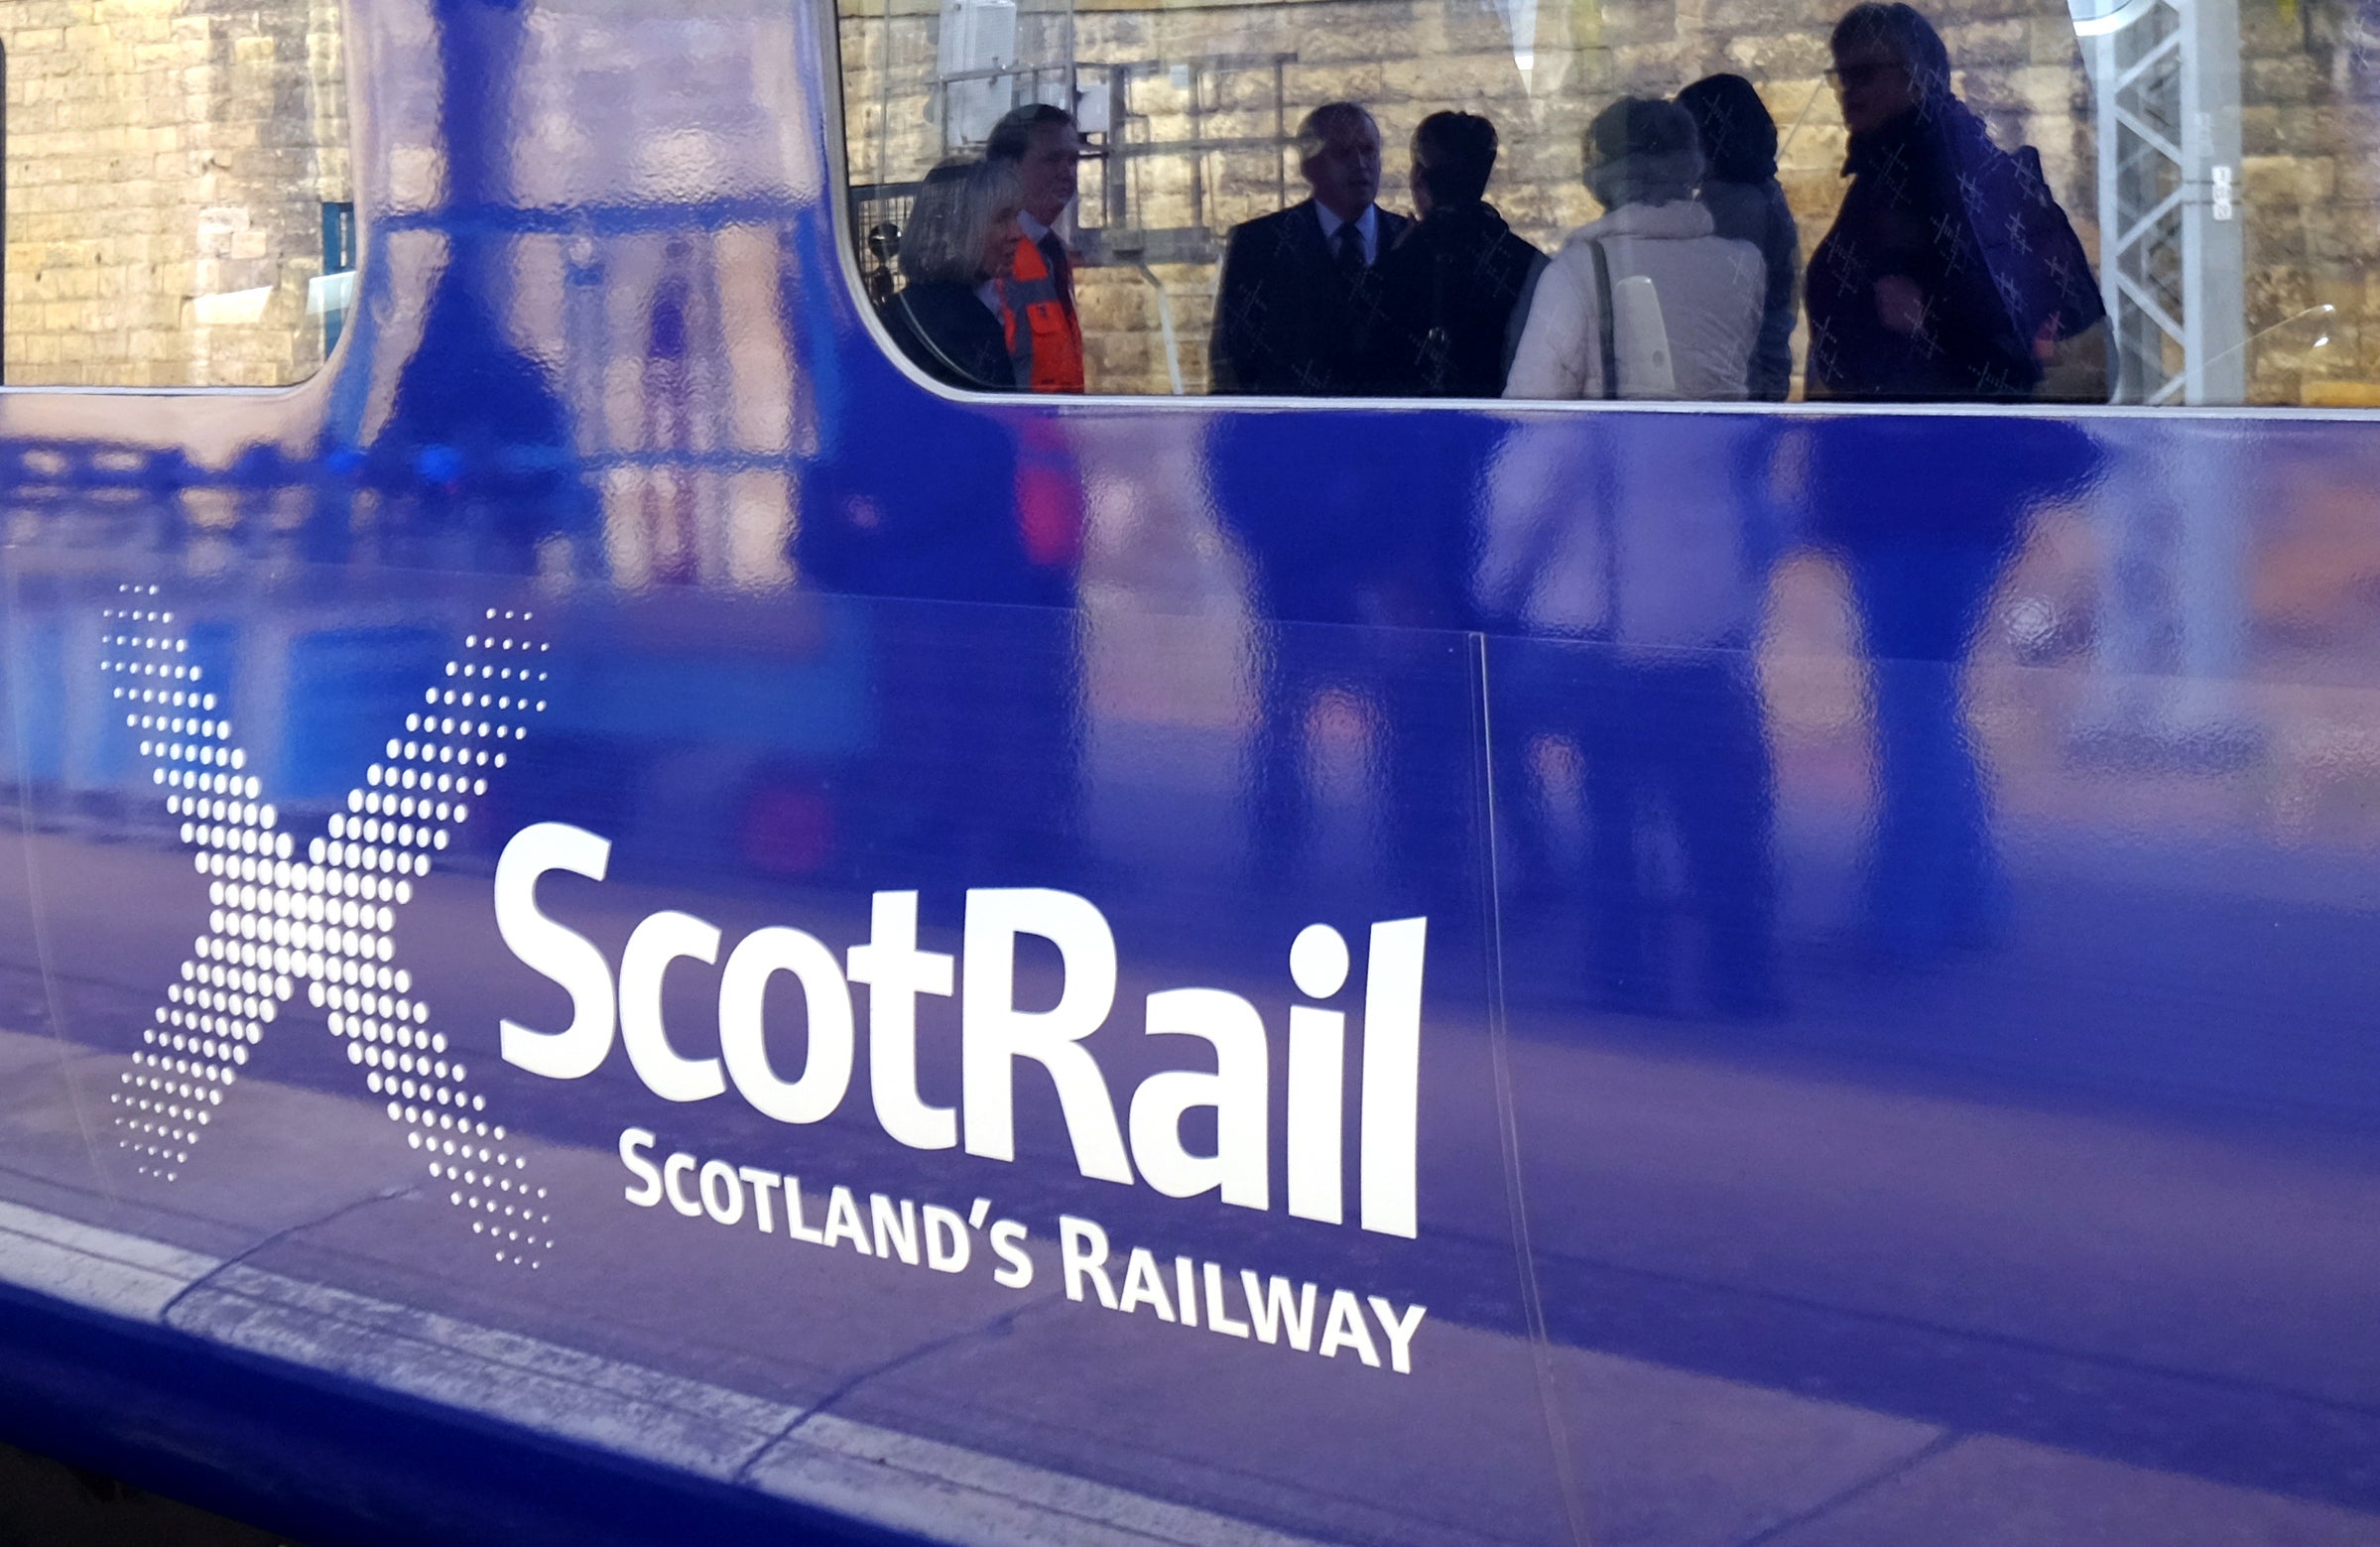 Rail fares in Scotland will rise by 3.8% in January, it has been confirmed (Jane Barlow/PA)